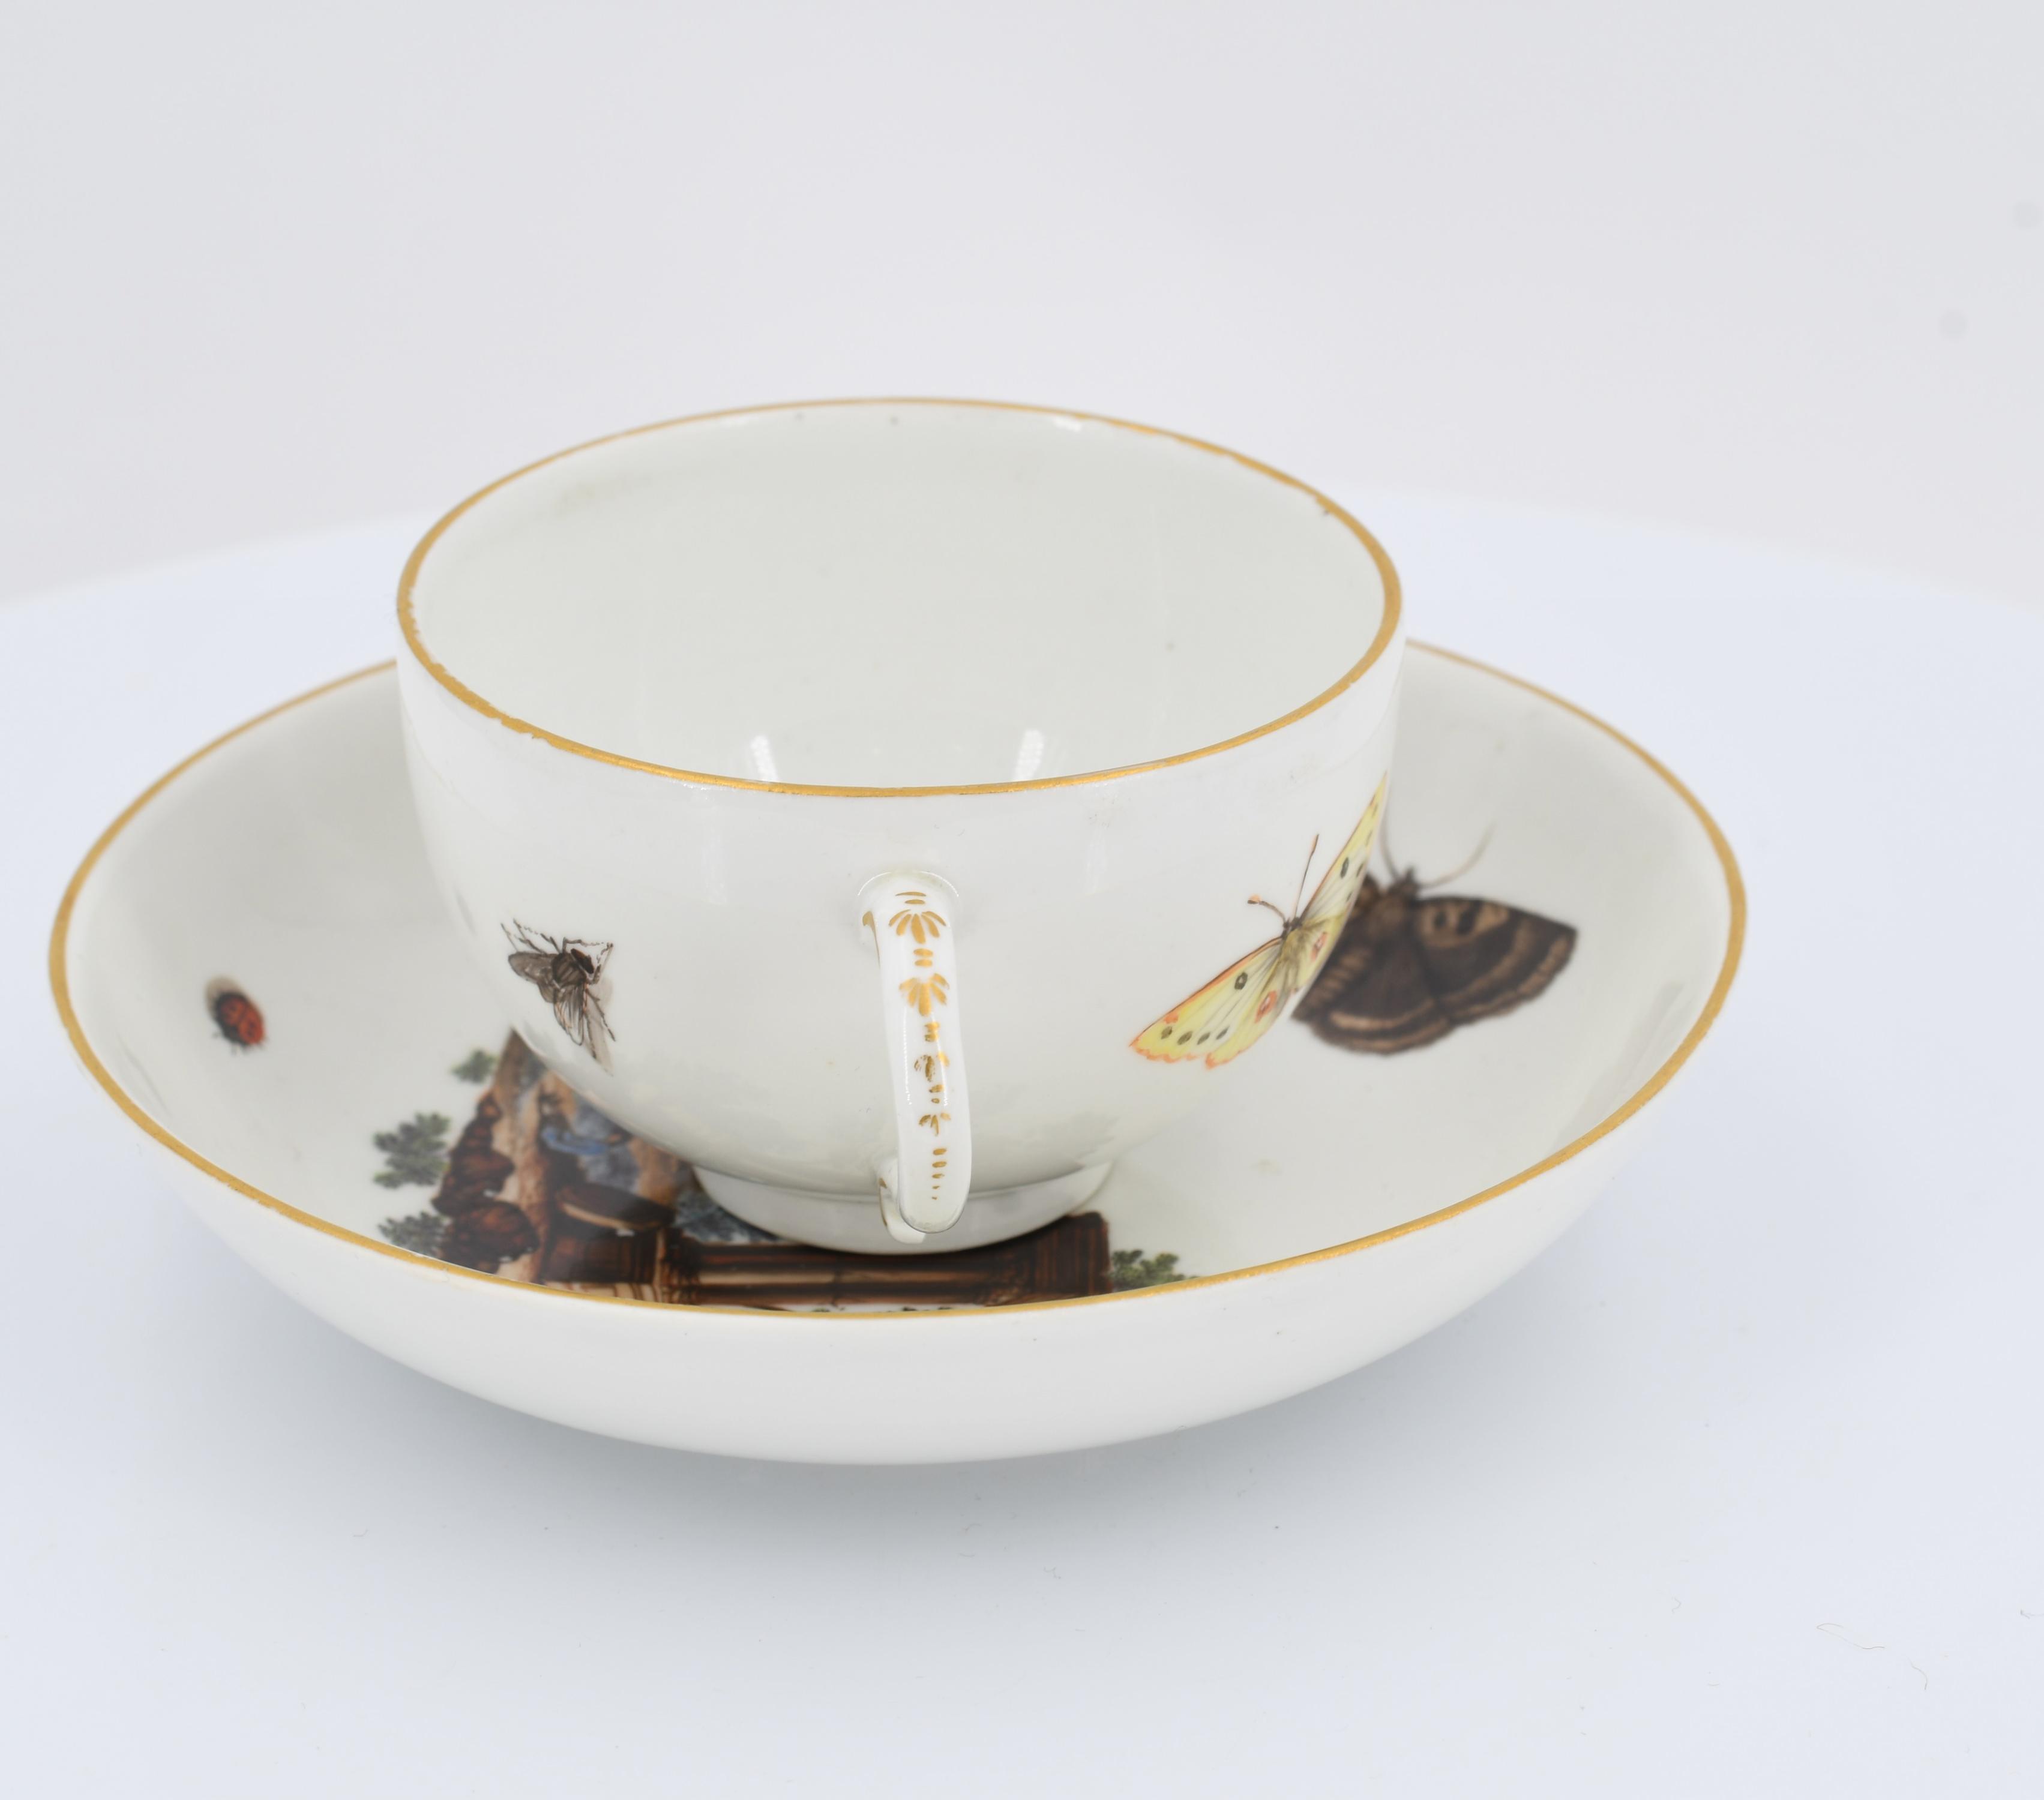 Cup and saucer with rural scenes and insects - Image 3 of 7